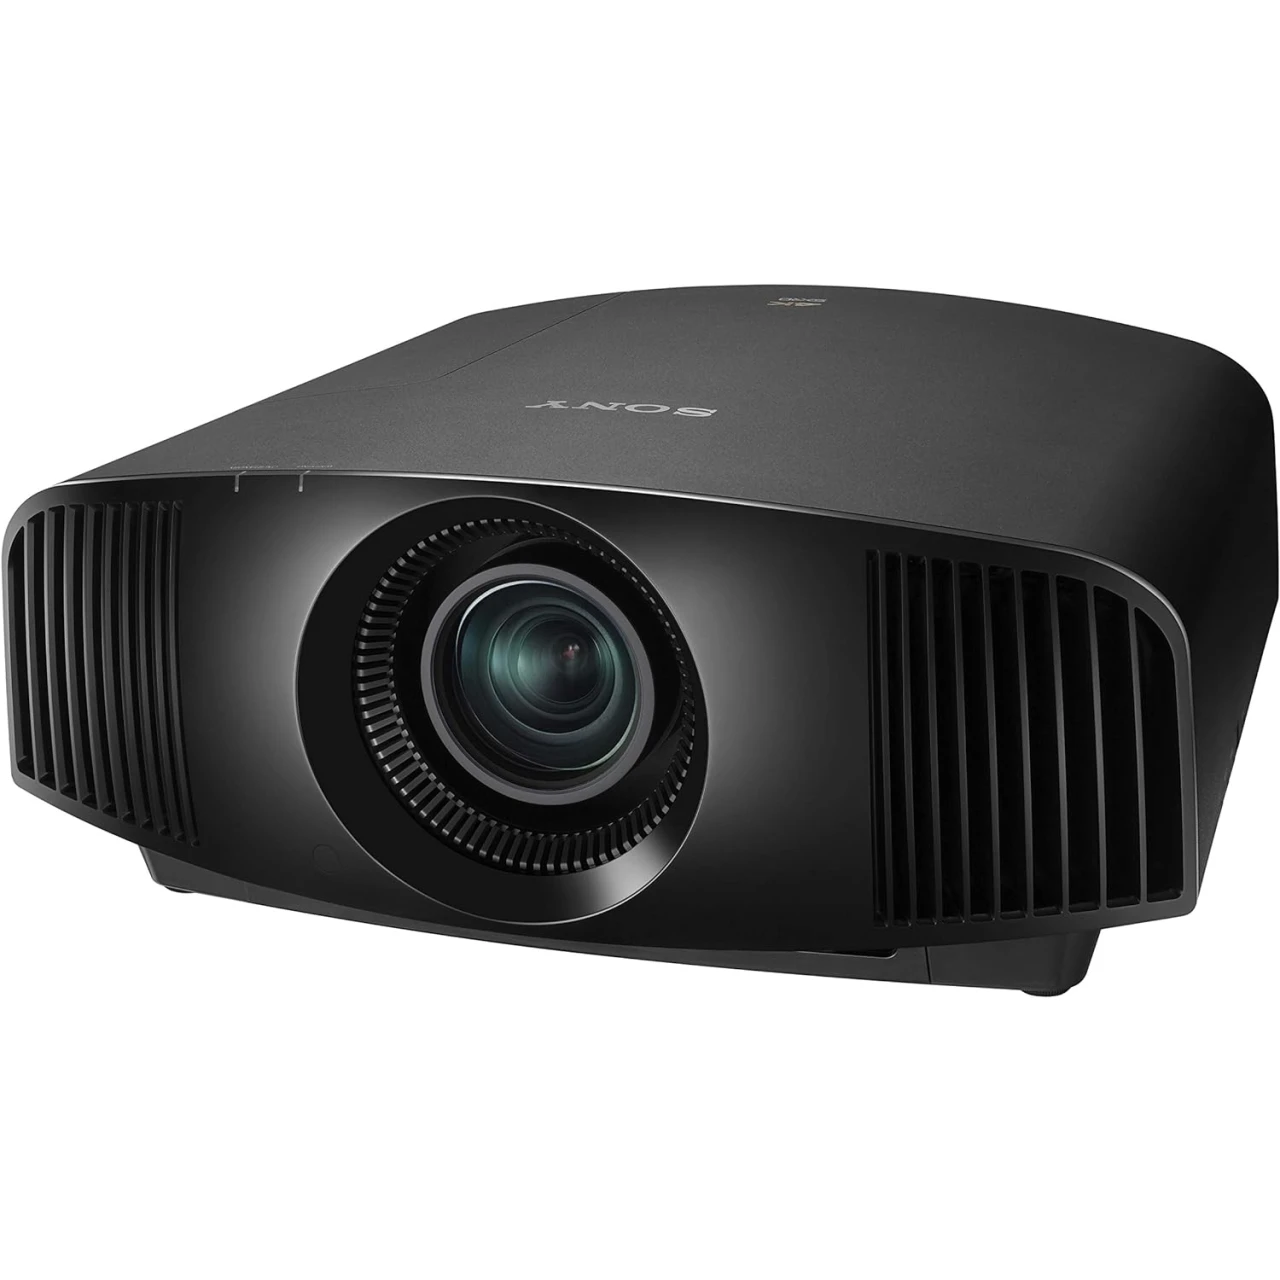 Sony Home Theater Projector VPL-VW295ES: Full 4K HDR Video Projector for TV, Movies and Gaming